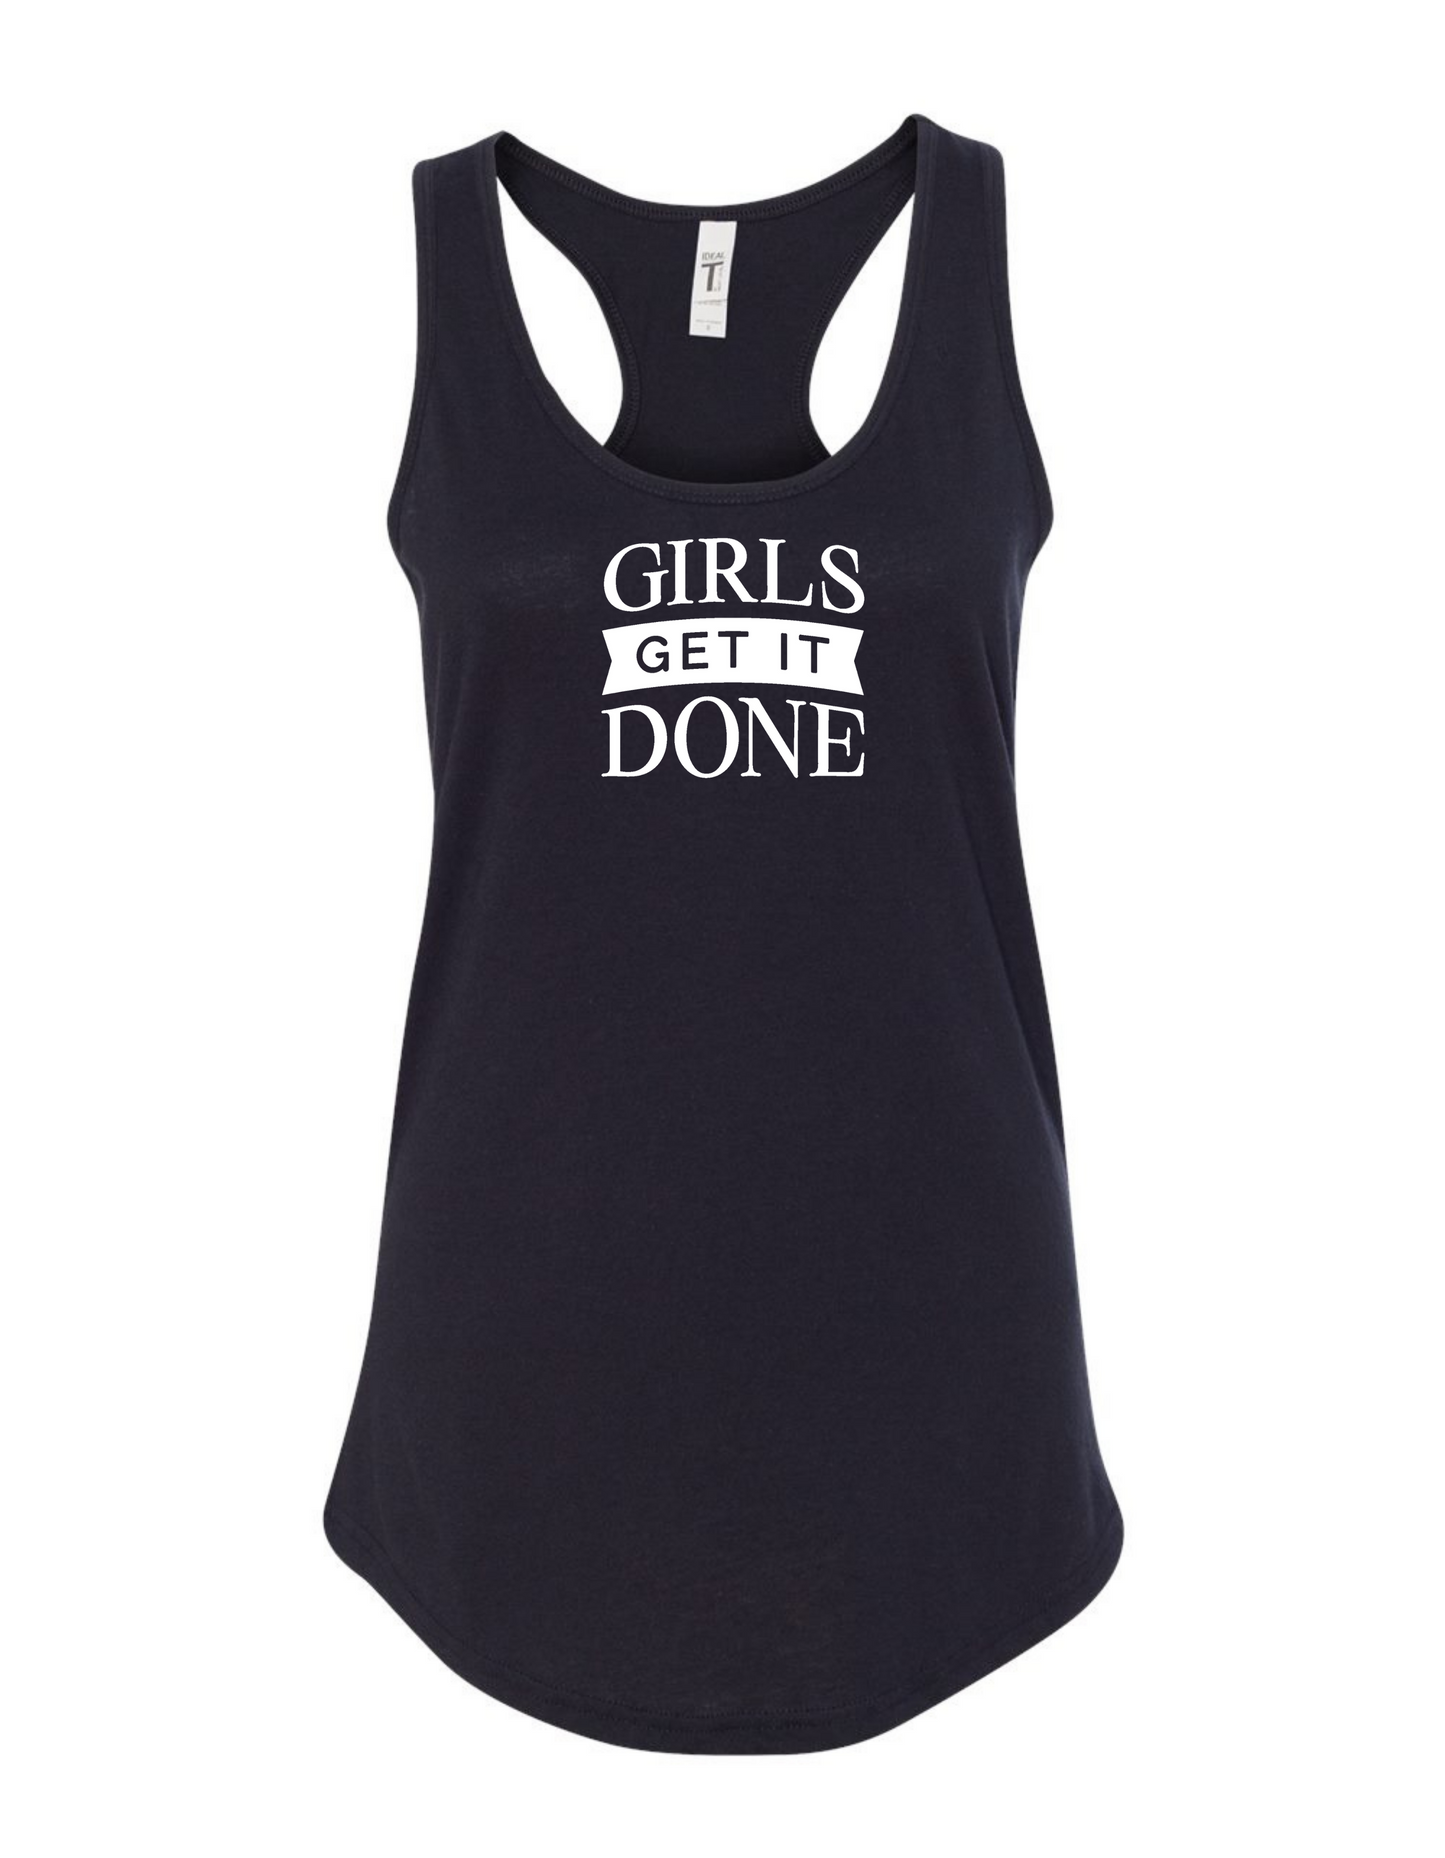 Girls Get It Done - Racerback Ladies Tank - Mister Snarky's